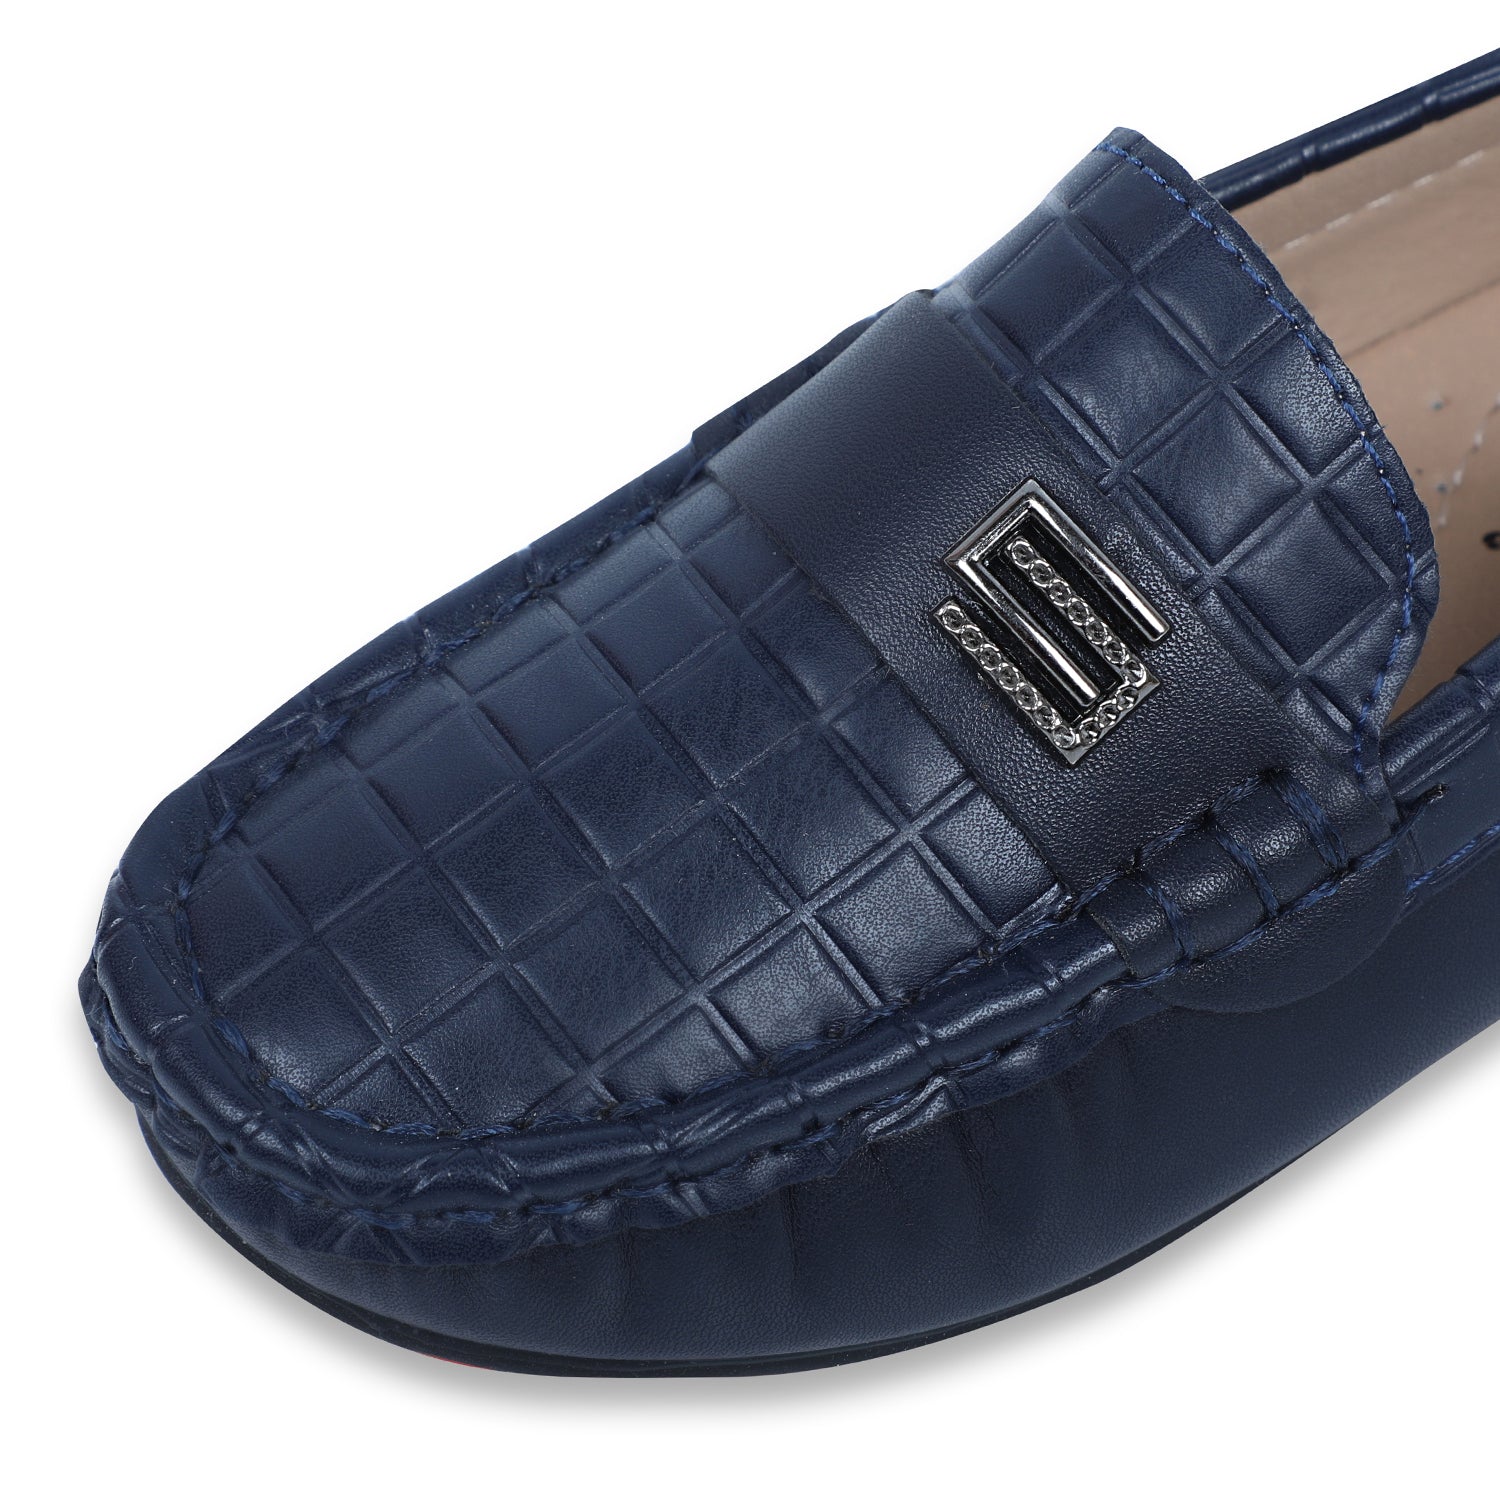 Baby Moo x Bash Kids Embossed Leatherite Loafer Shoes - Navy Blue